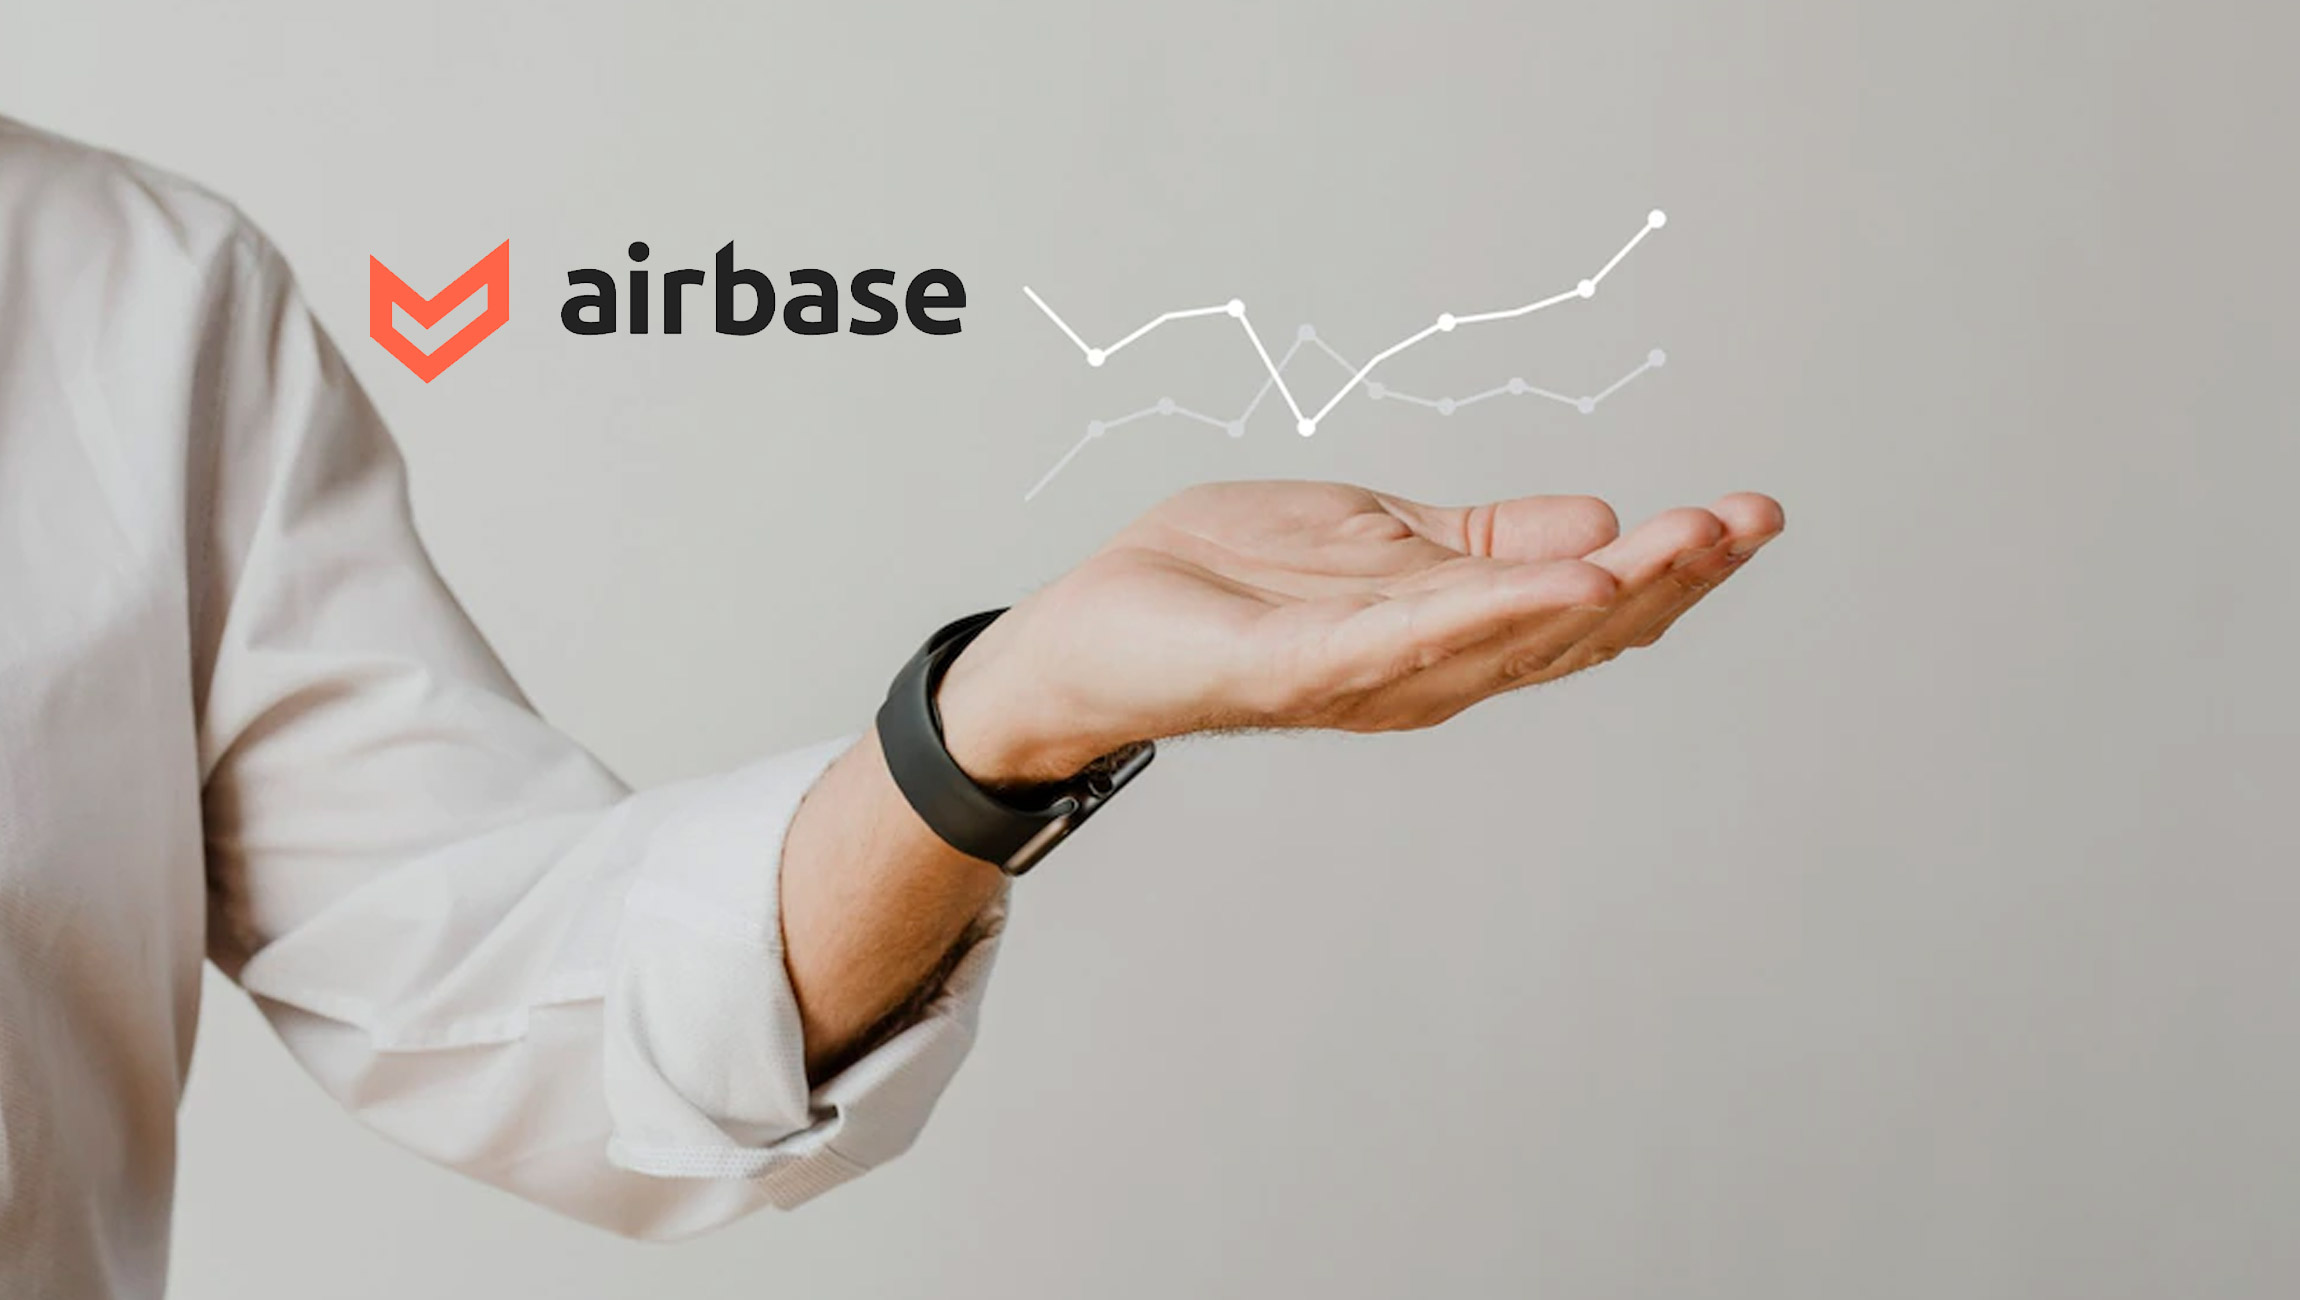 Airbase Adds Philip Lacor as Chief Revenue Officer to Lead Next Phase of Growth